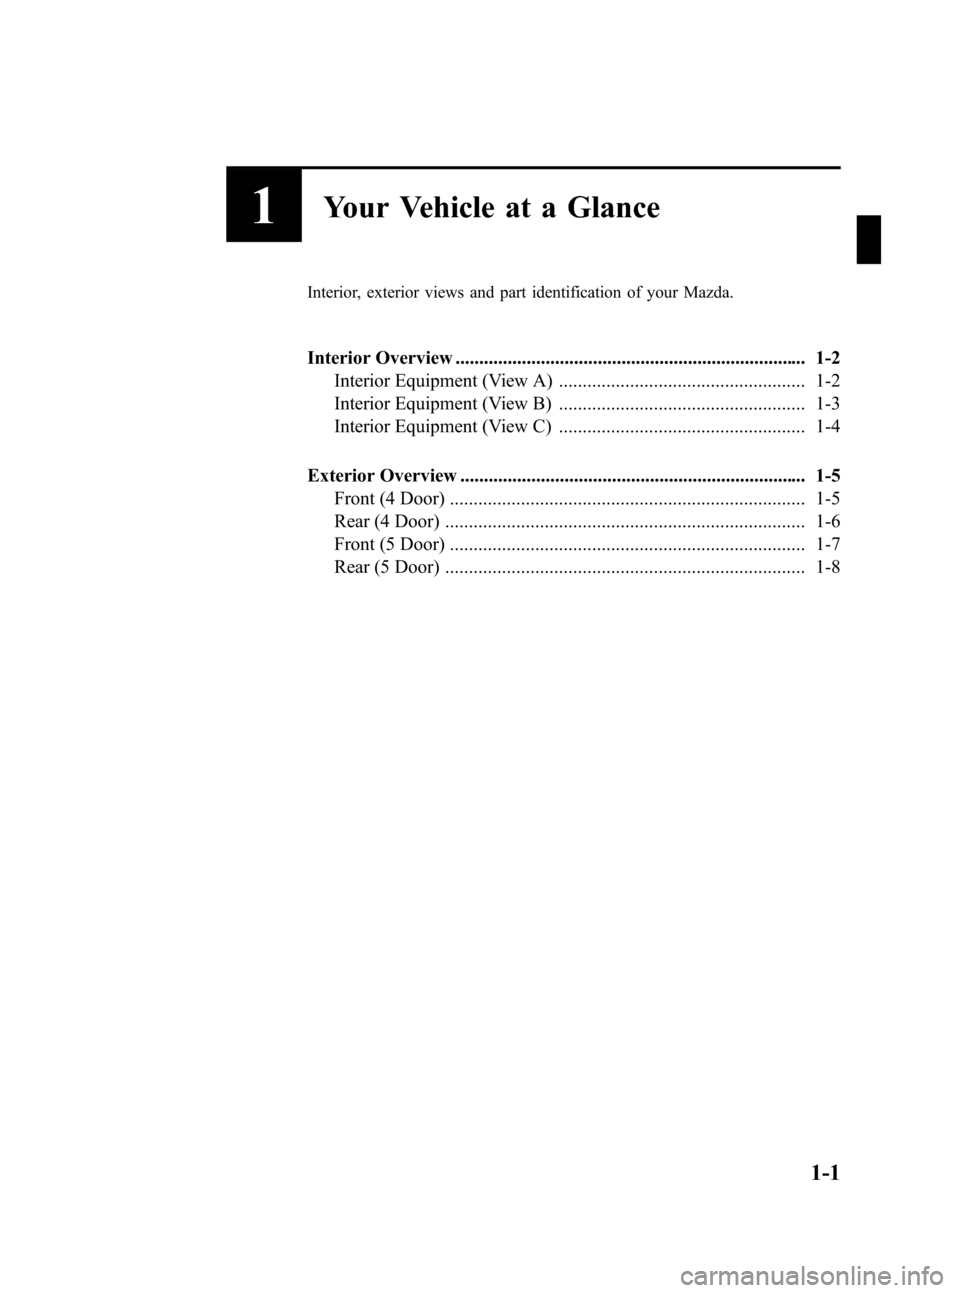 MAZDA MODEL 3 HATCHBACK 2011  Owners Manual (in English) Black plate (7,1)
1Your Vehicle at a Glance
Interior, exterior views and part identification of your Mazda.
Interior Overview ..........................................................................